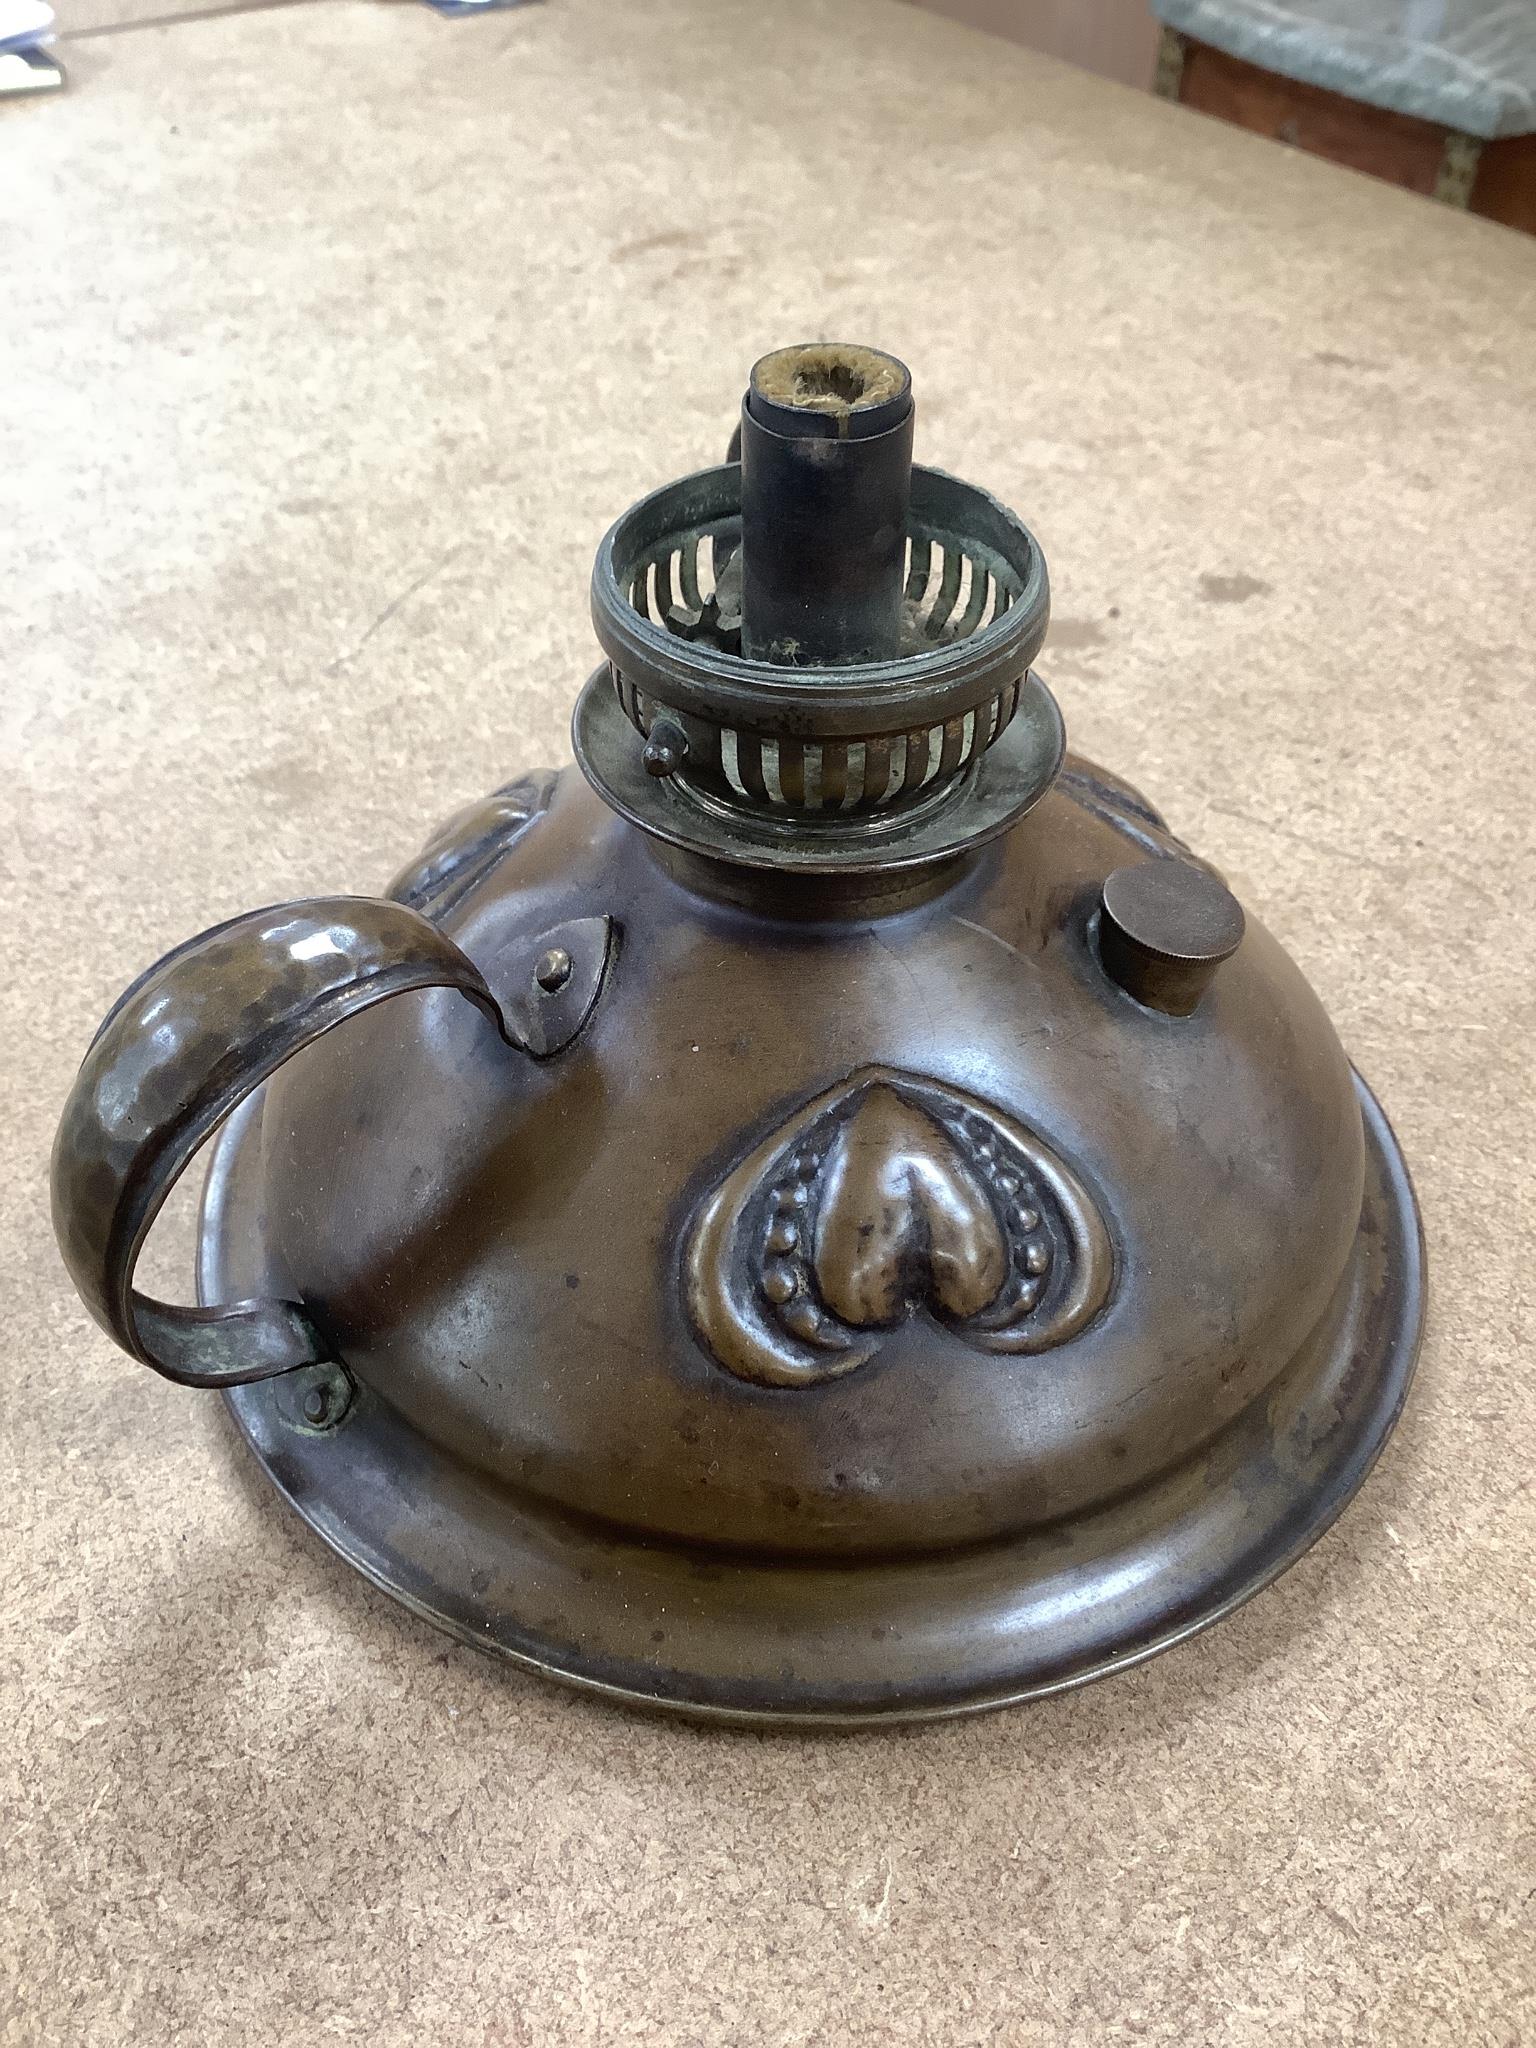 An unusual Victorian copper pie-mould, teak cased set of Bezique scorers, a brass link chain, a 19th century pewter pitcher, an Art Nouveau oil lamp, and two other items